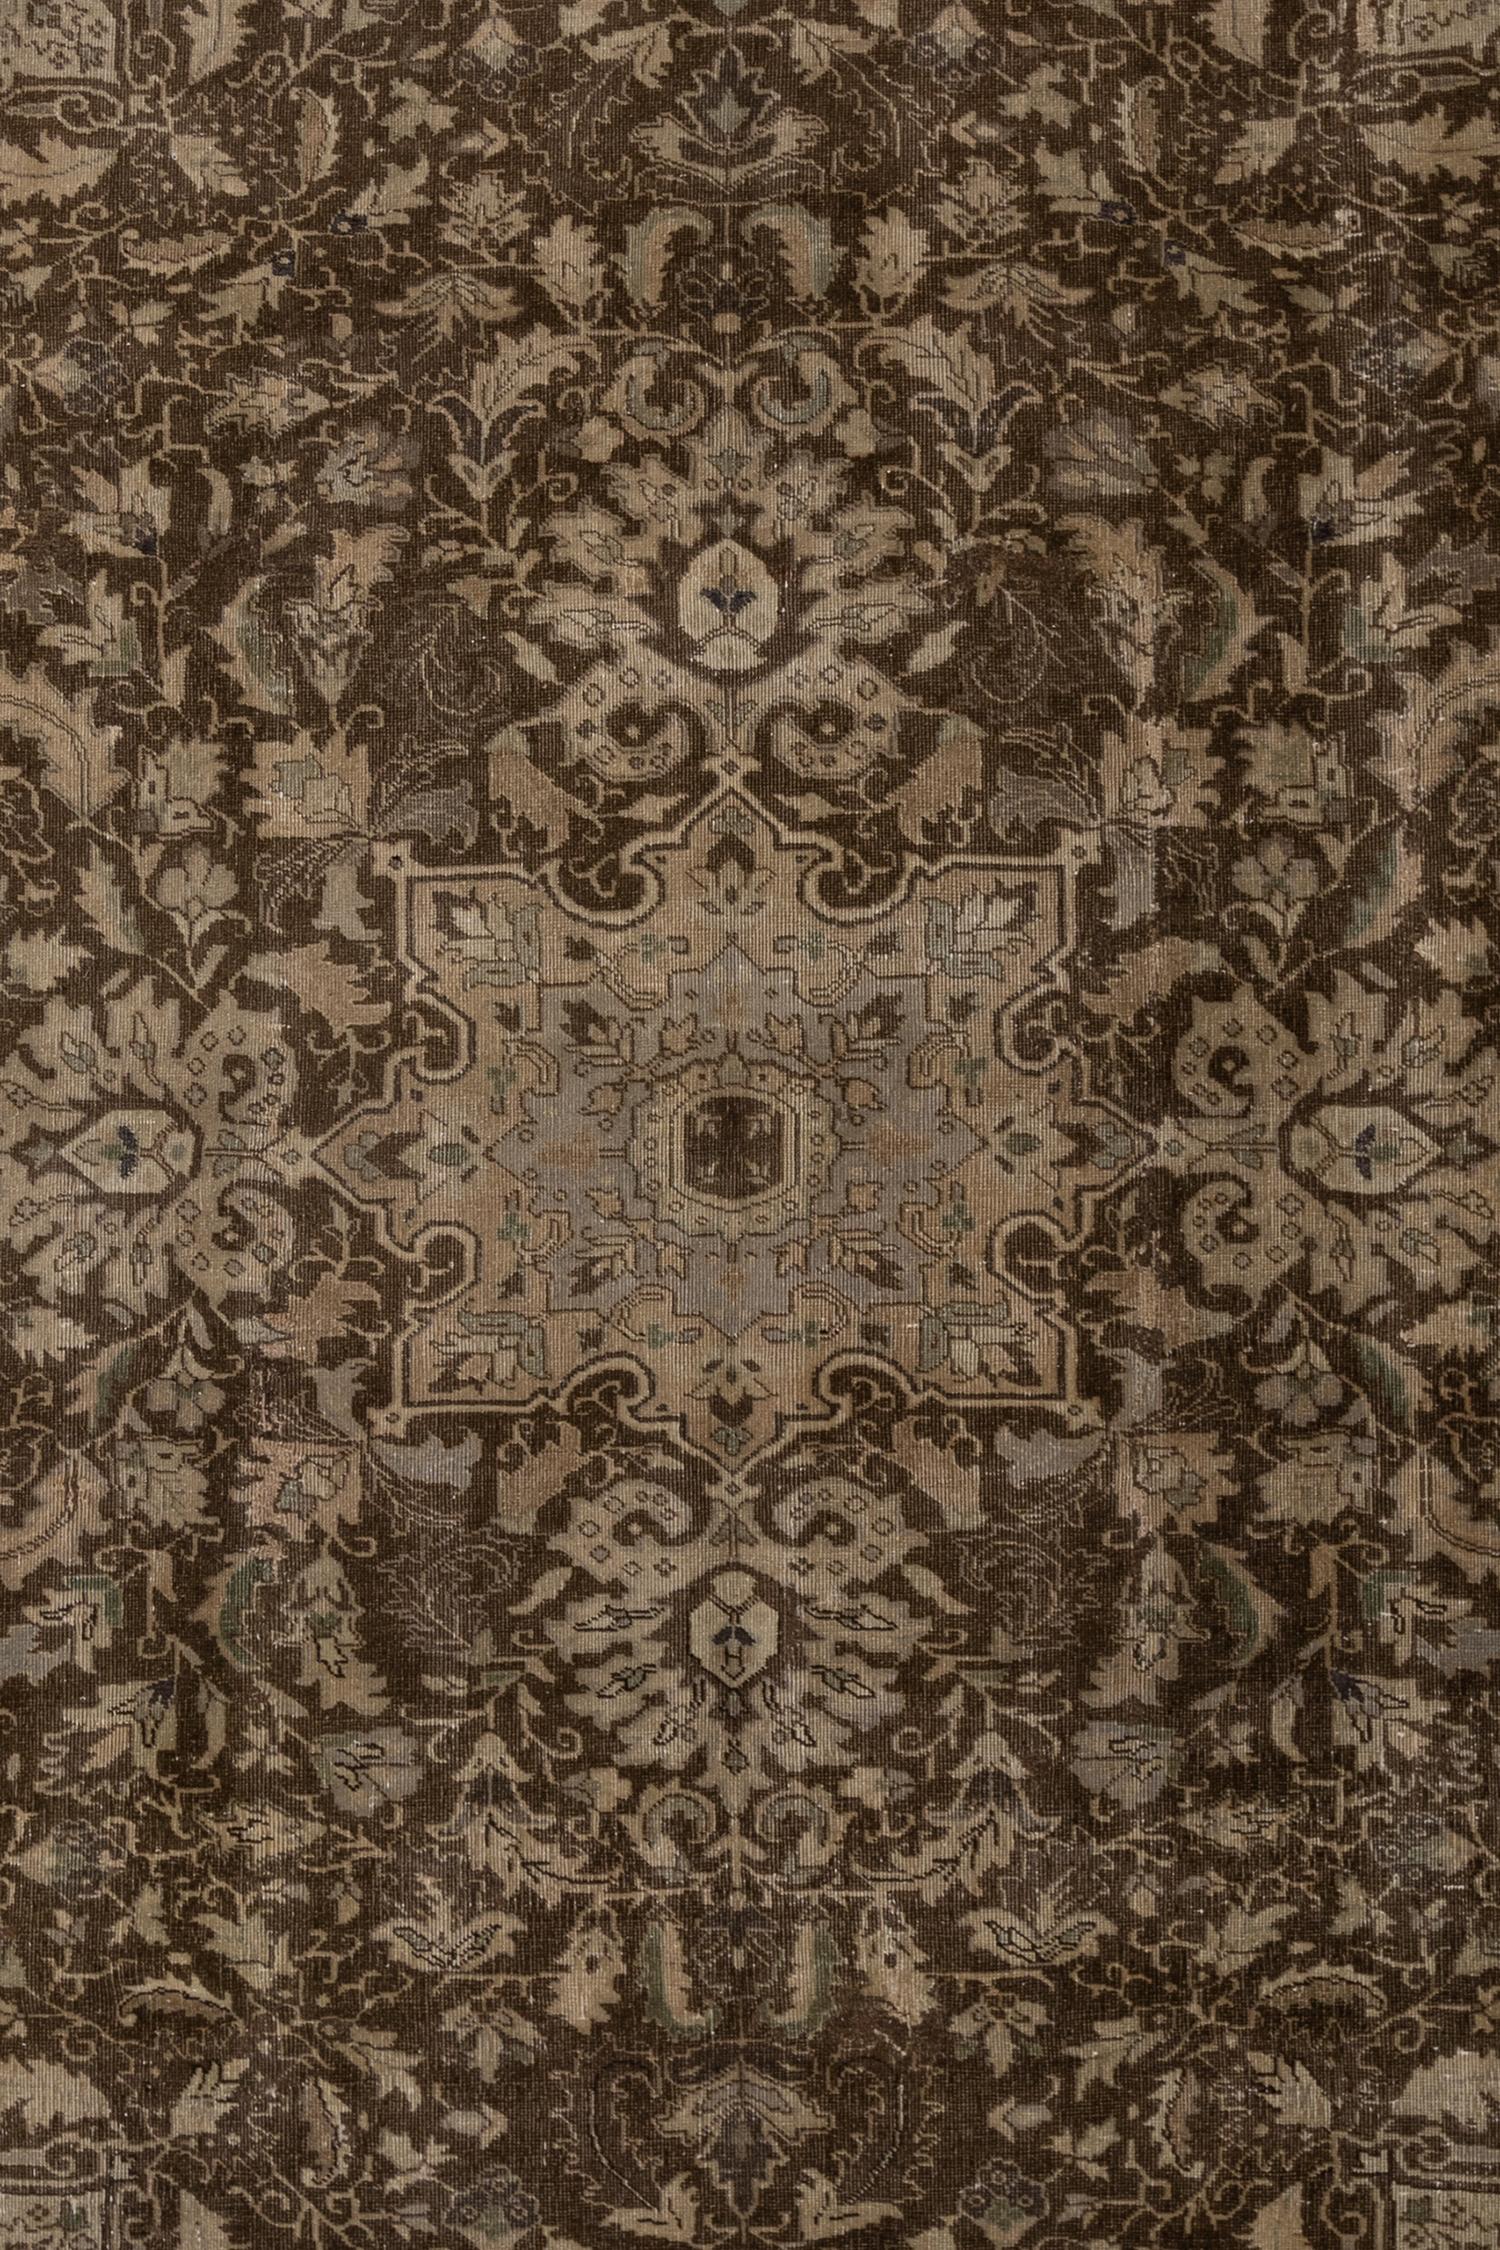 Age: Circa 1940

Colors: Deep chocolate brown field with a beautiful warm cream border and some olive accents. 

Pile: low

Wear Notes: 3

Material: Wool on cotton. 

Thick handle, well suited for high traffic.

Wear Guide:
Vintage and antique rugs